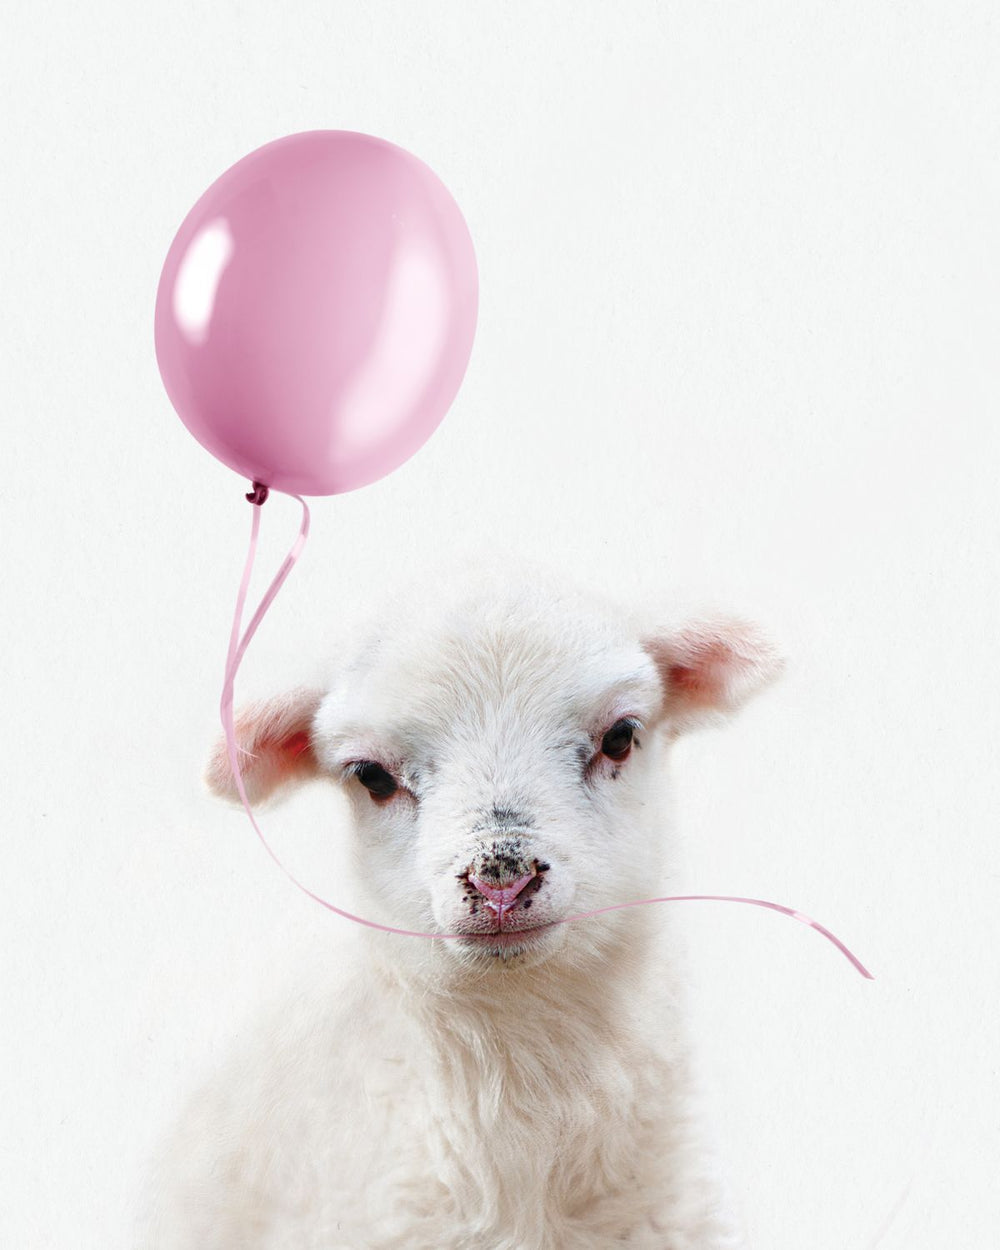 Goat And Pink Balloon